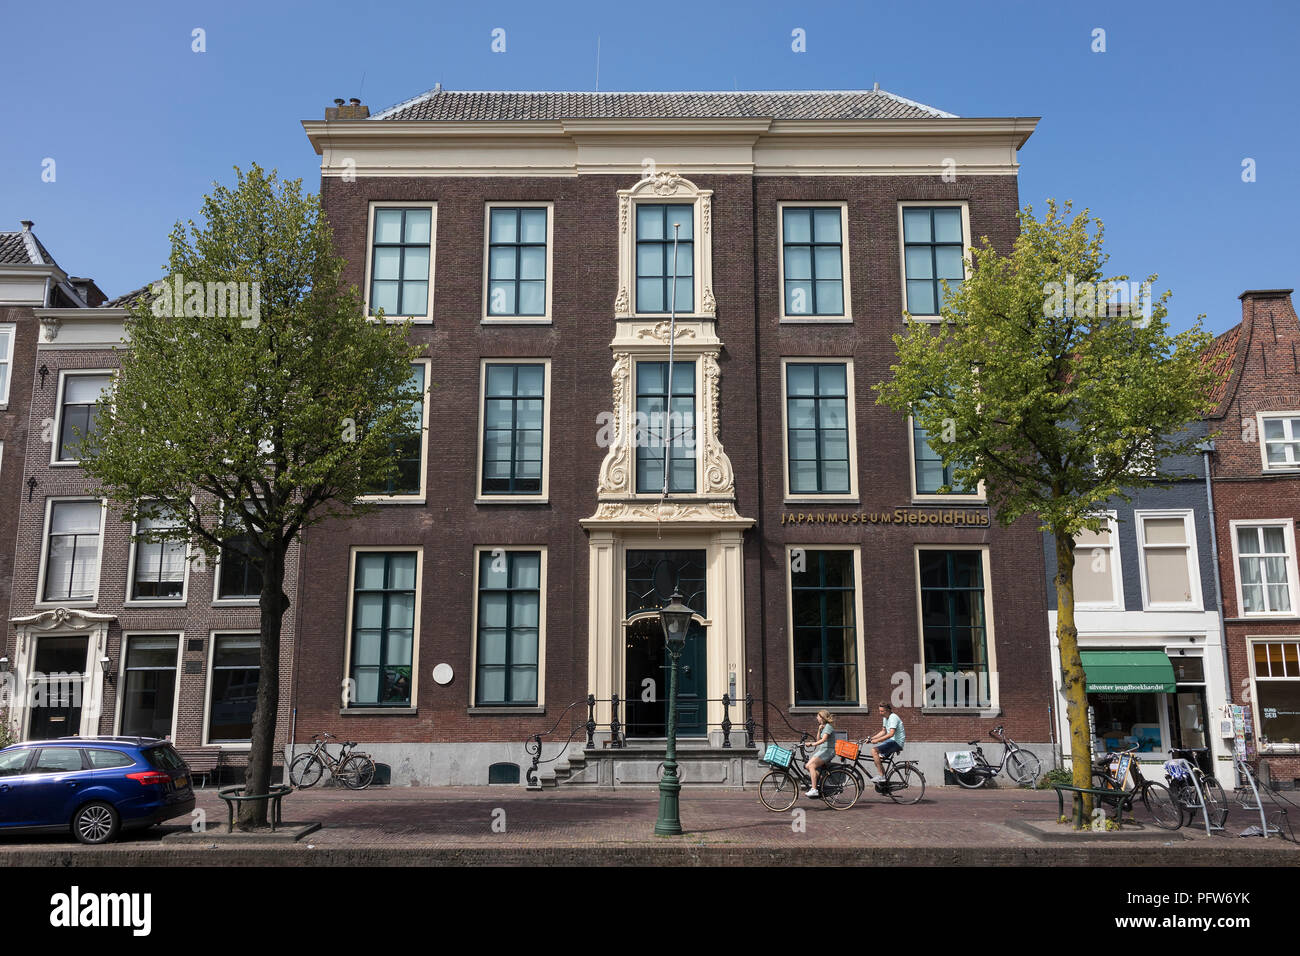 Leiden, Netherlands - July 17, 2018: Facade of the Sieboldhuis, Japan museum at the Rapenburg in the center of Leiden Stock Photo